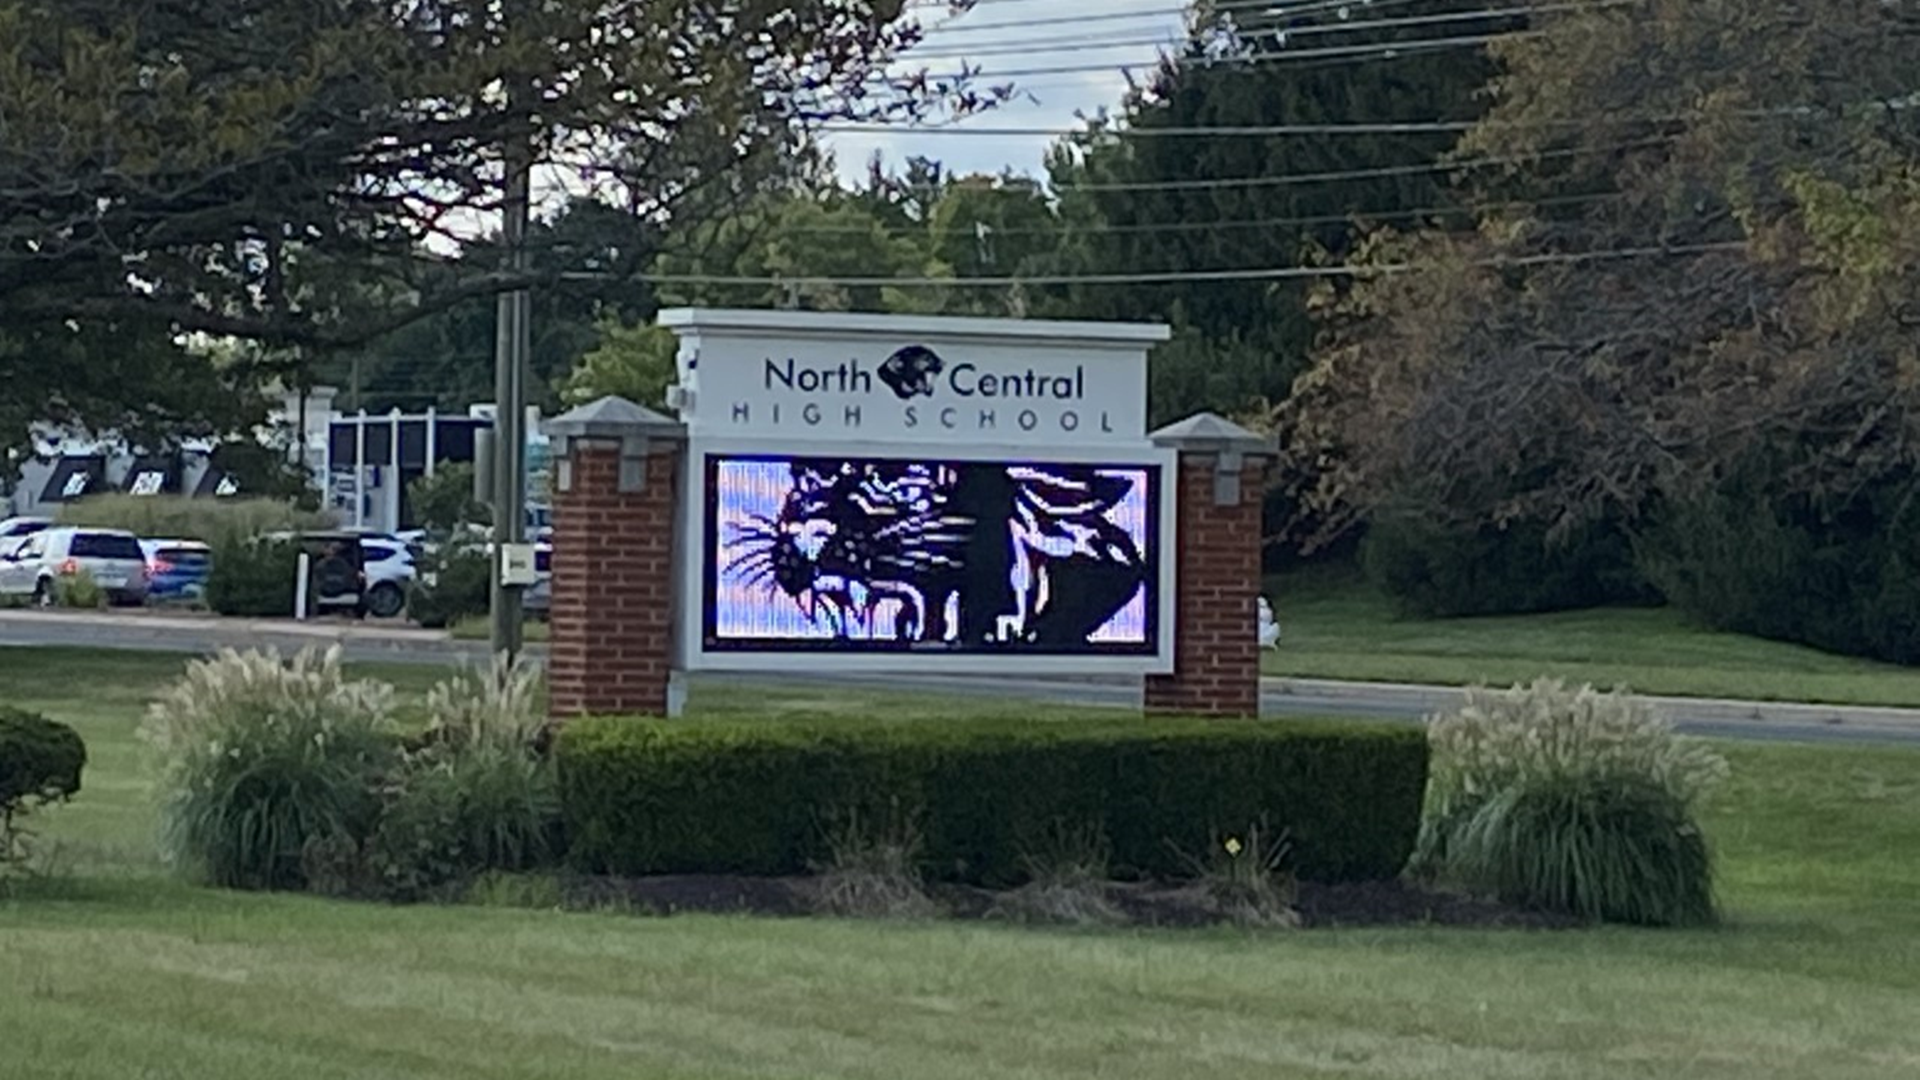 Students at North Central High School demonstrated over what they called safety issues at the school after a student was stabbed.